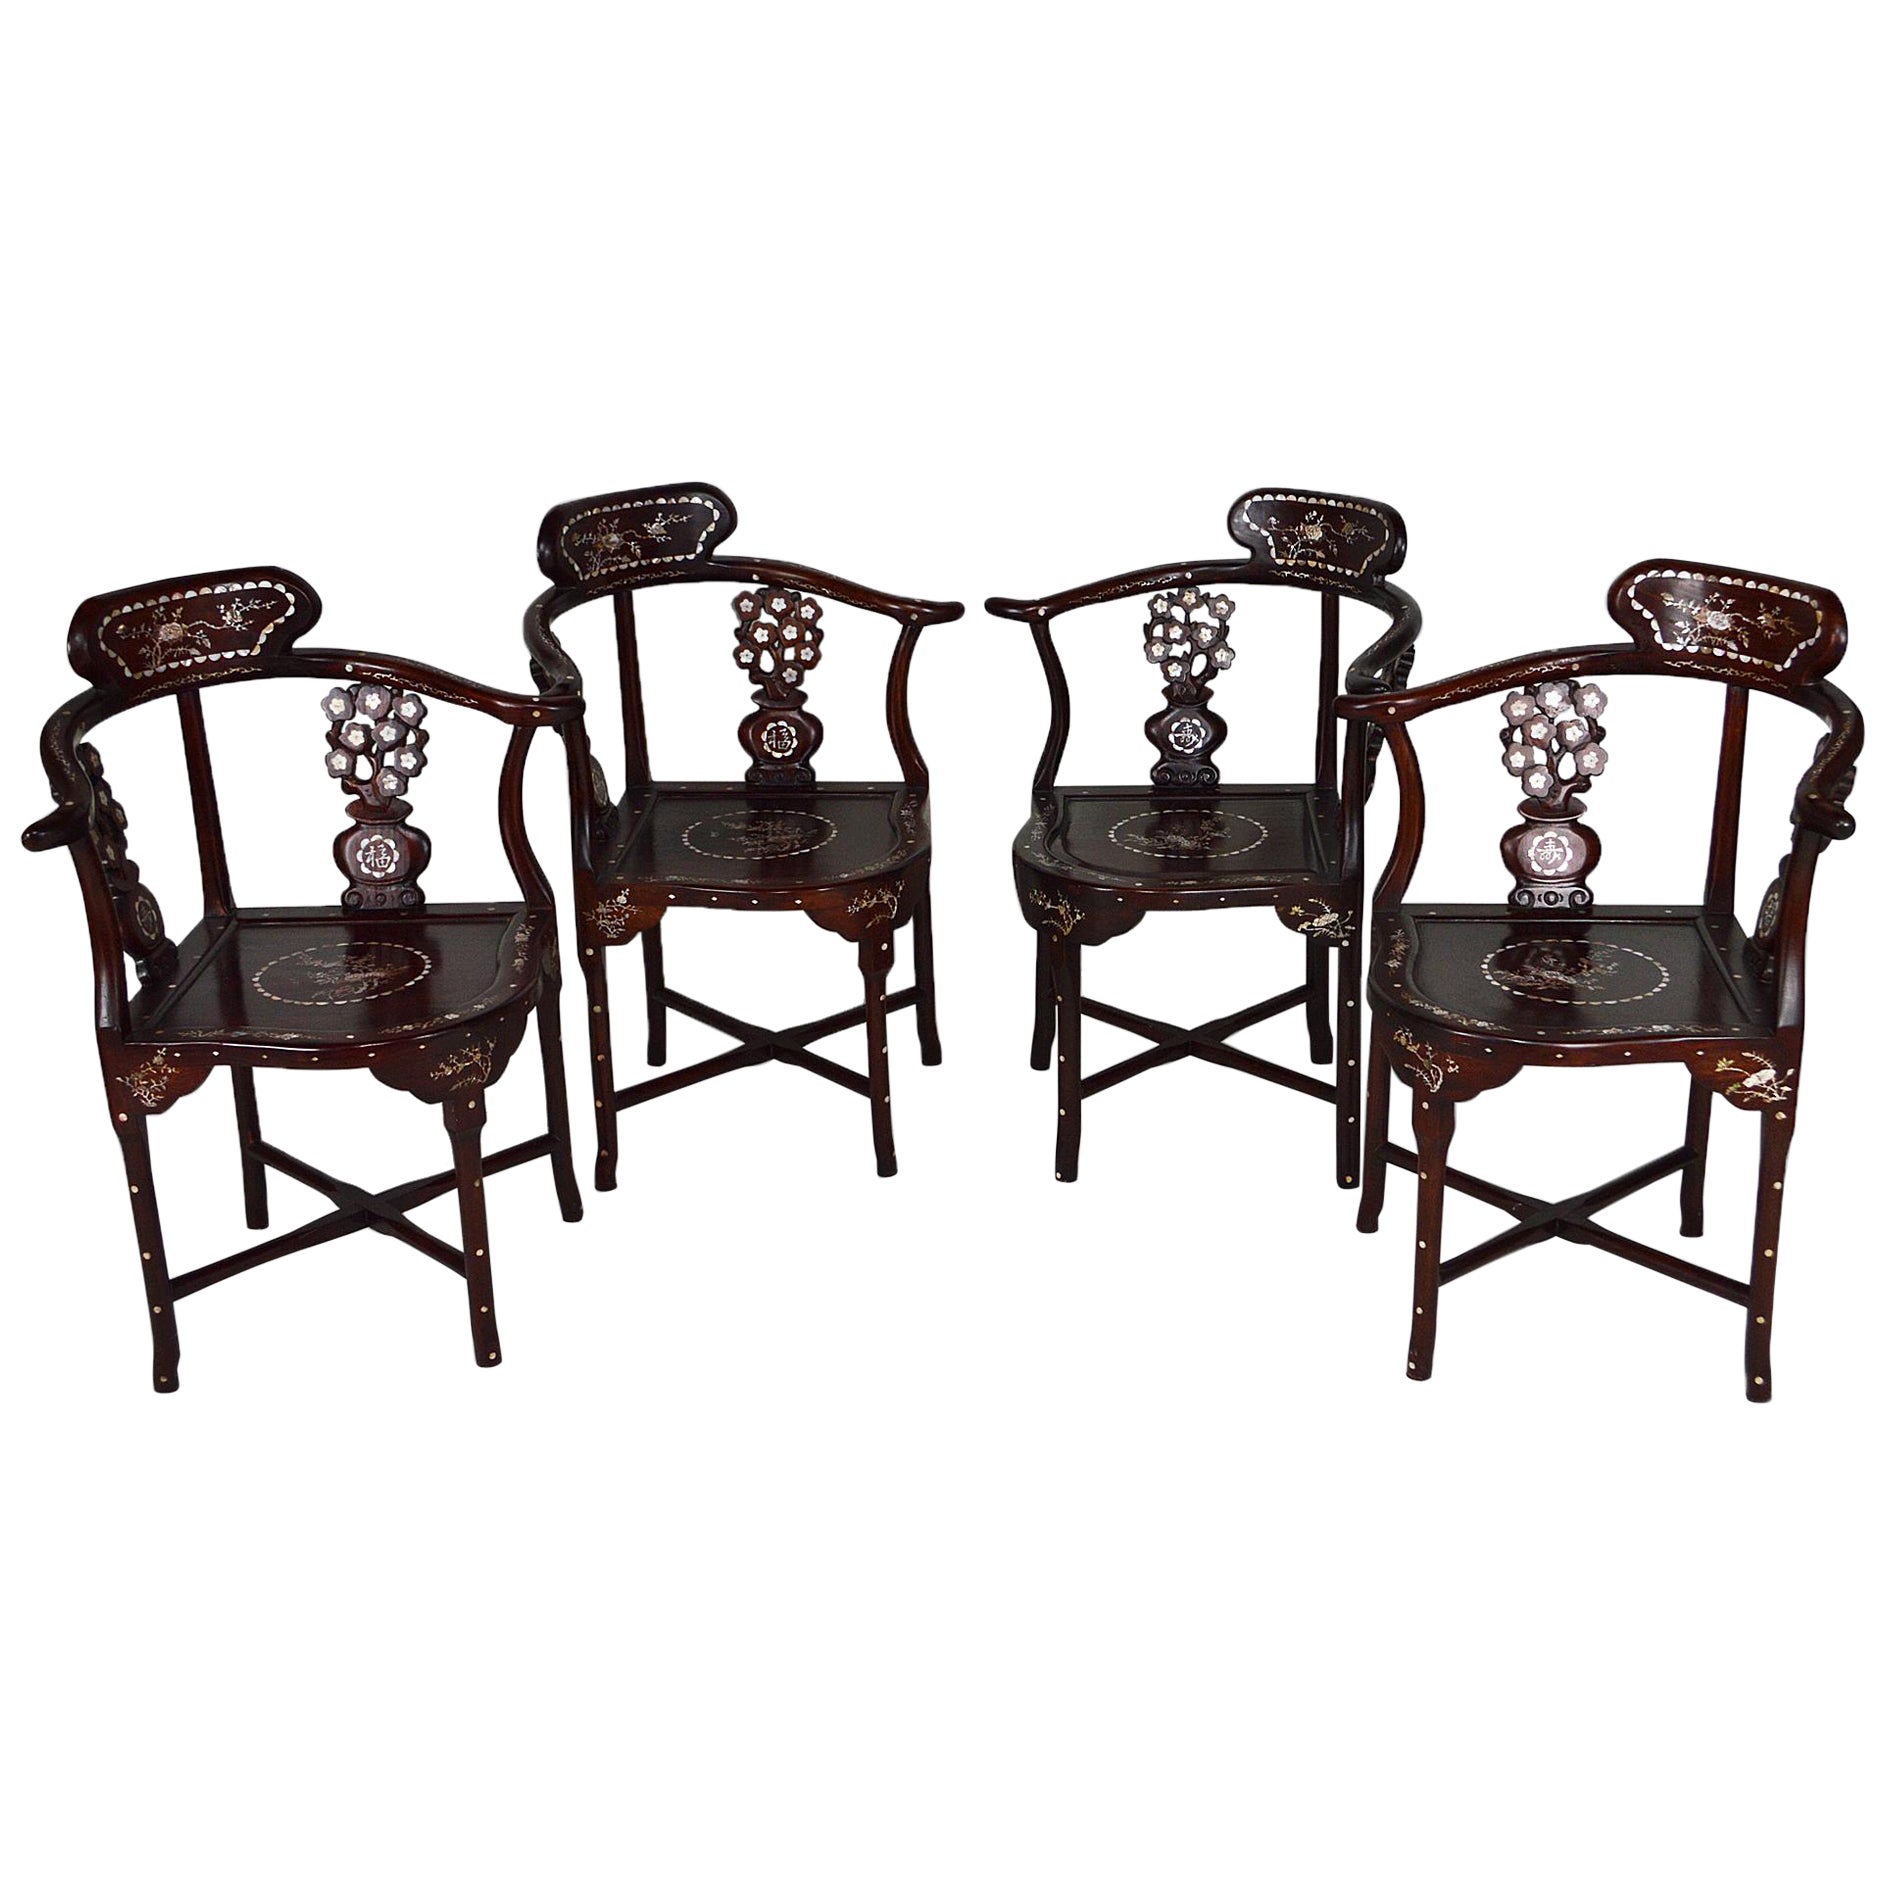 Set of 4 Asian Armchairs in Carved and Inlaid Wood, circa 1900-1920